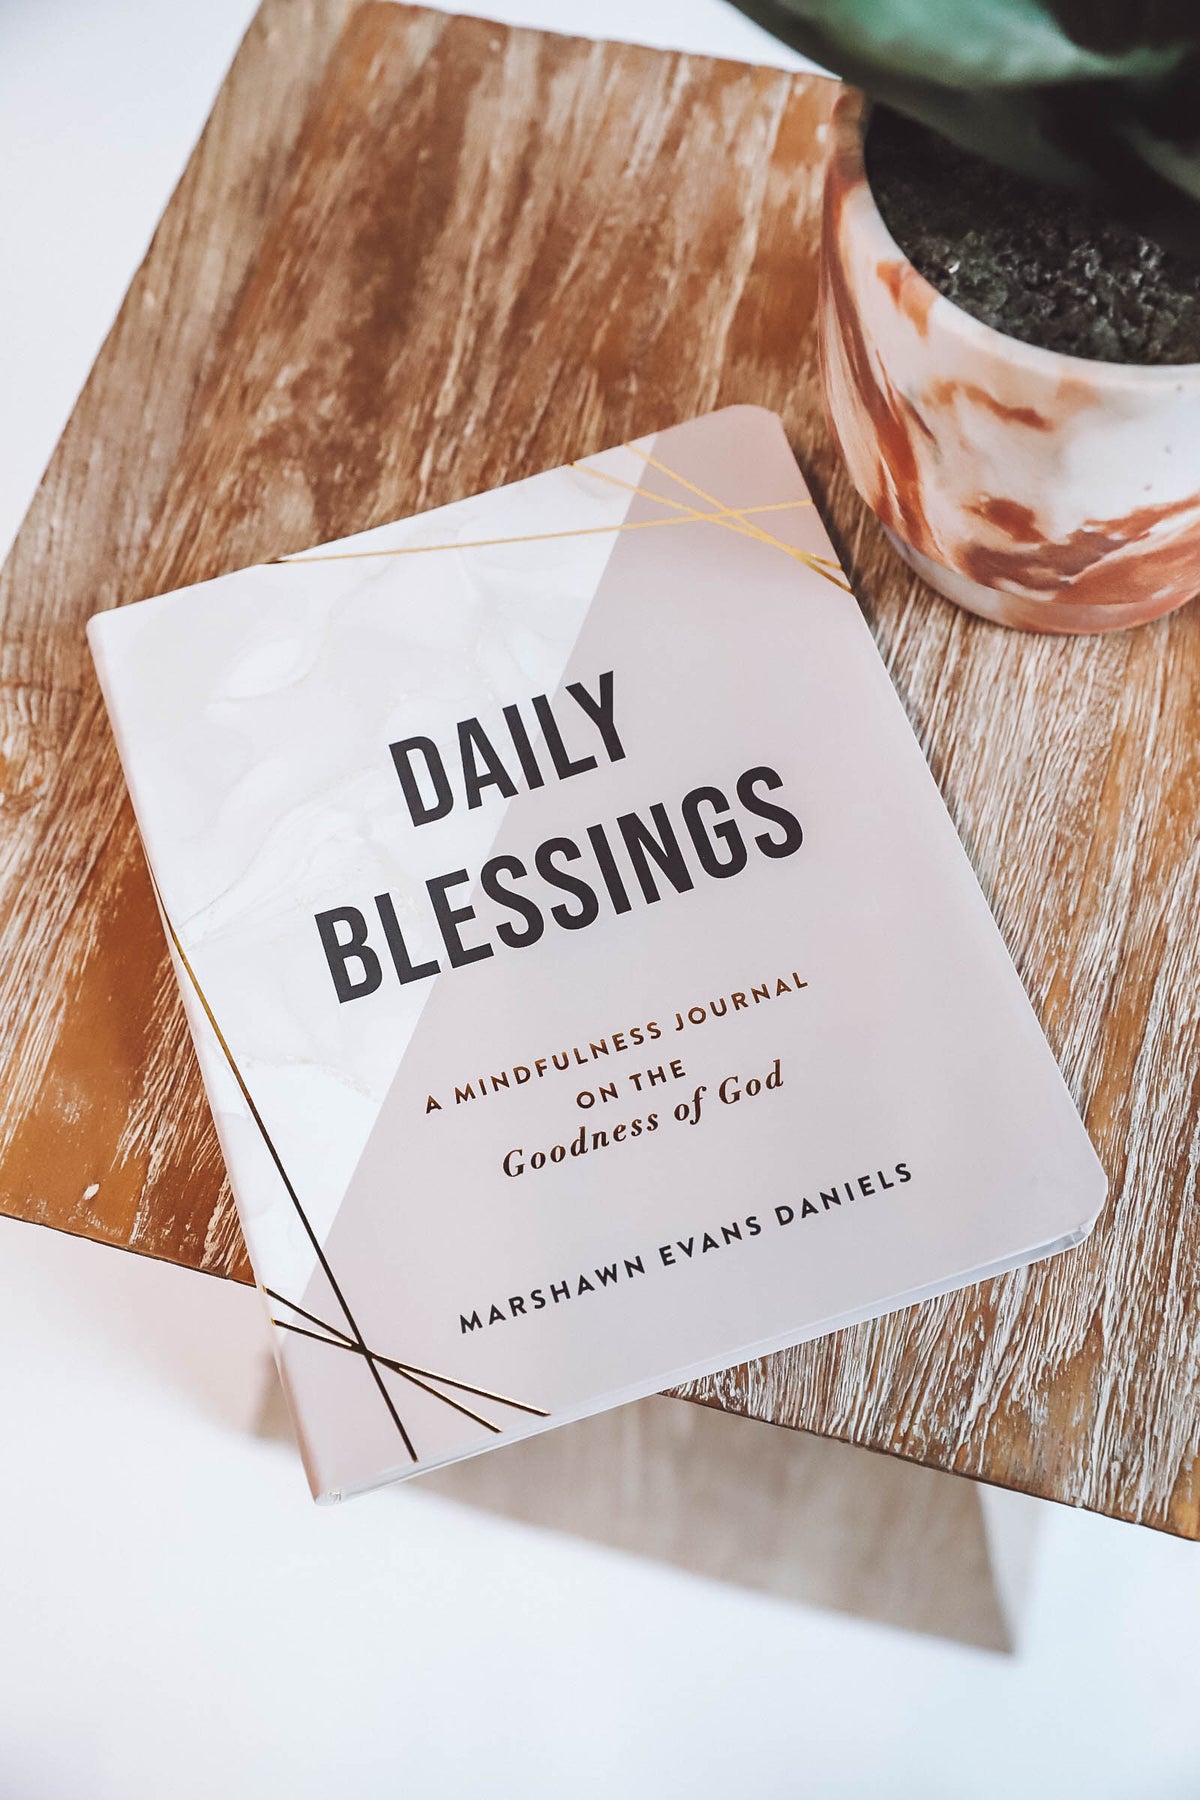 Daily Blessings: Mindfulness Journal-Marshawn Evans Daniels